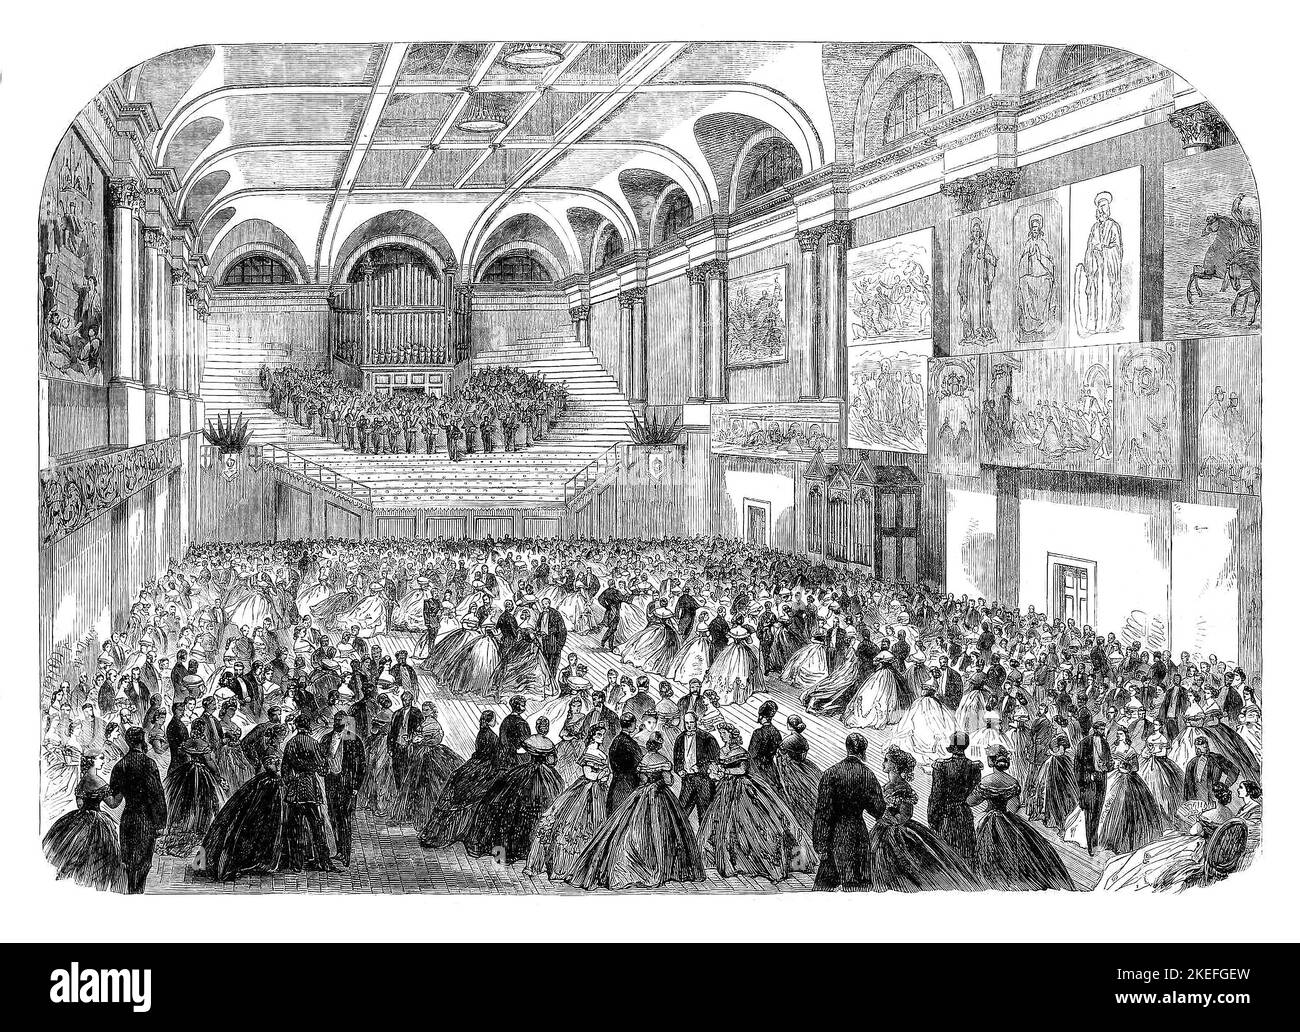 A ball in aid of the Irish Academy of Music given in the Concert Hall during the second Dublin International Exhibition, during the summer of 1865 in Ireland. Stock Photo